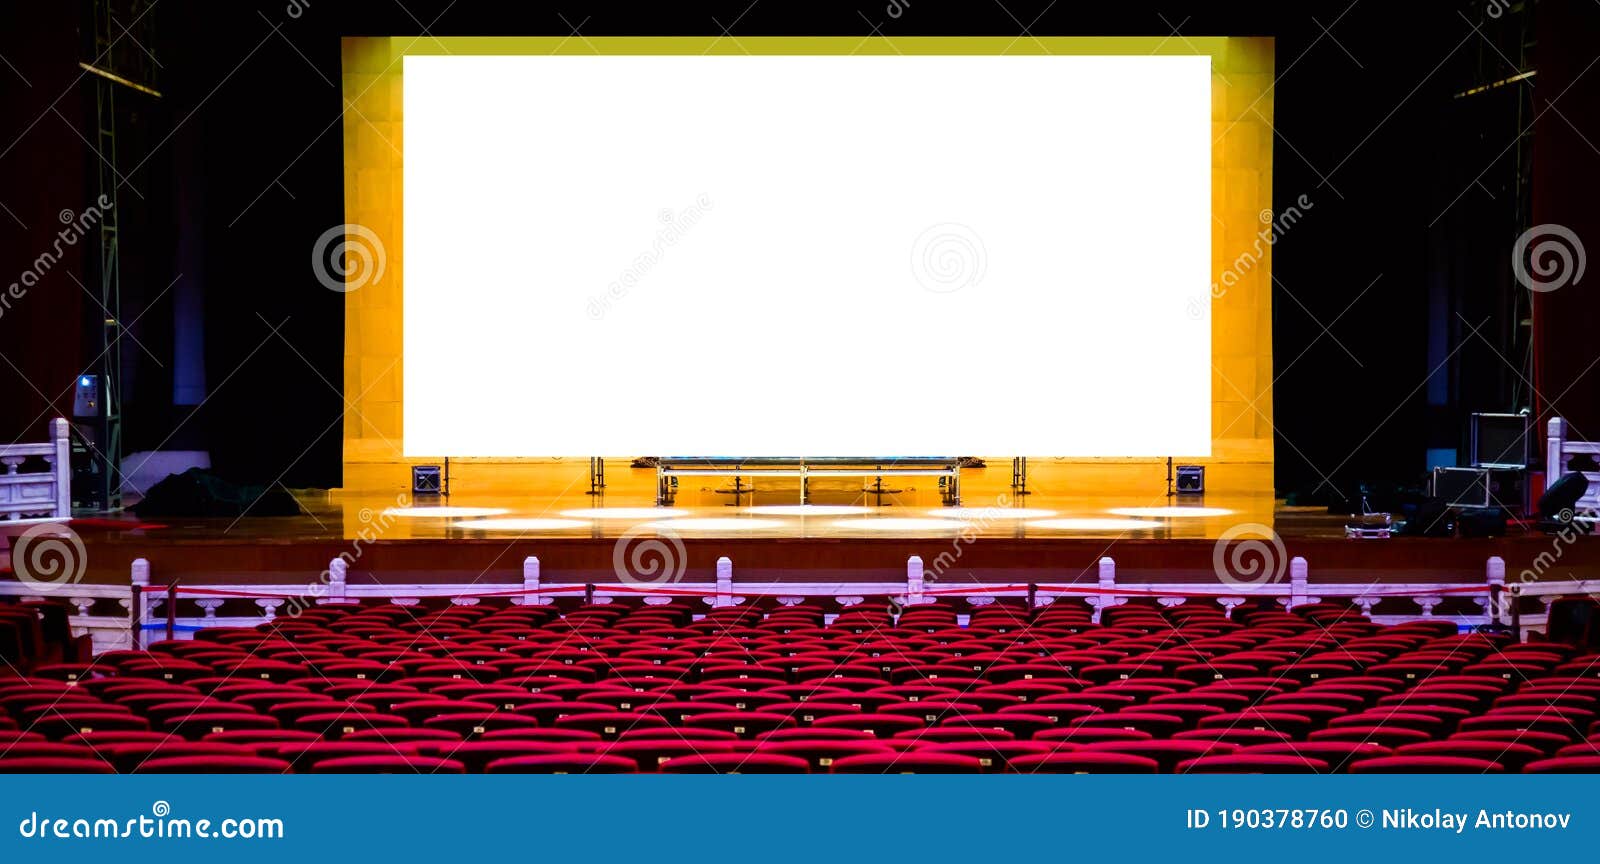 Download Concert Or Performance Hall. Red Seats Armchairs And The Stage Before Concert With Blank White ...